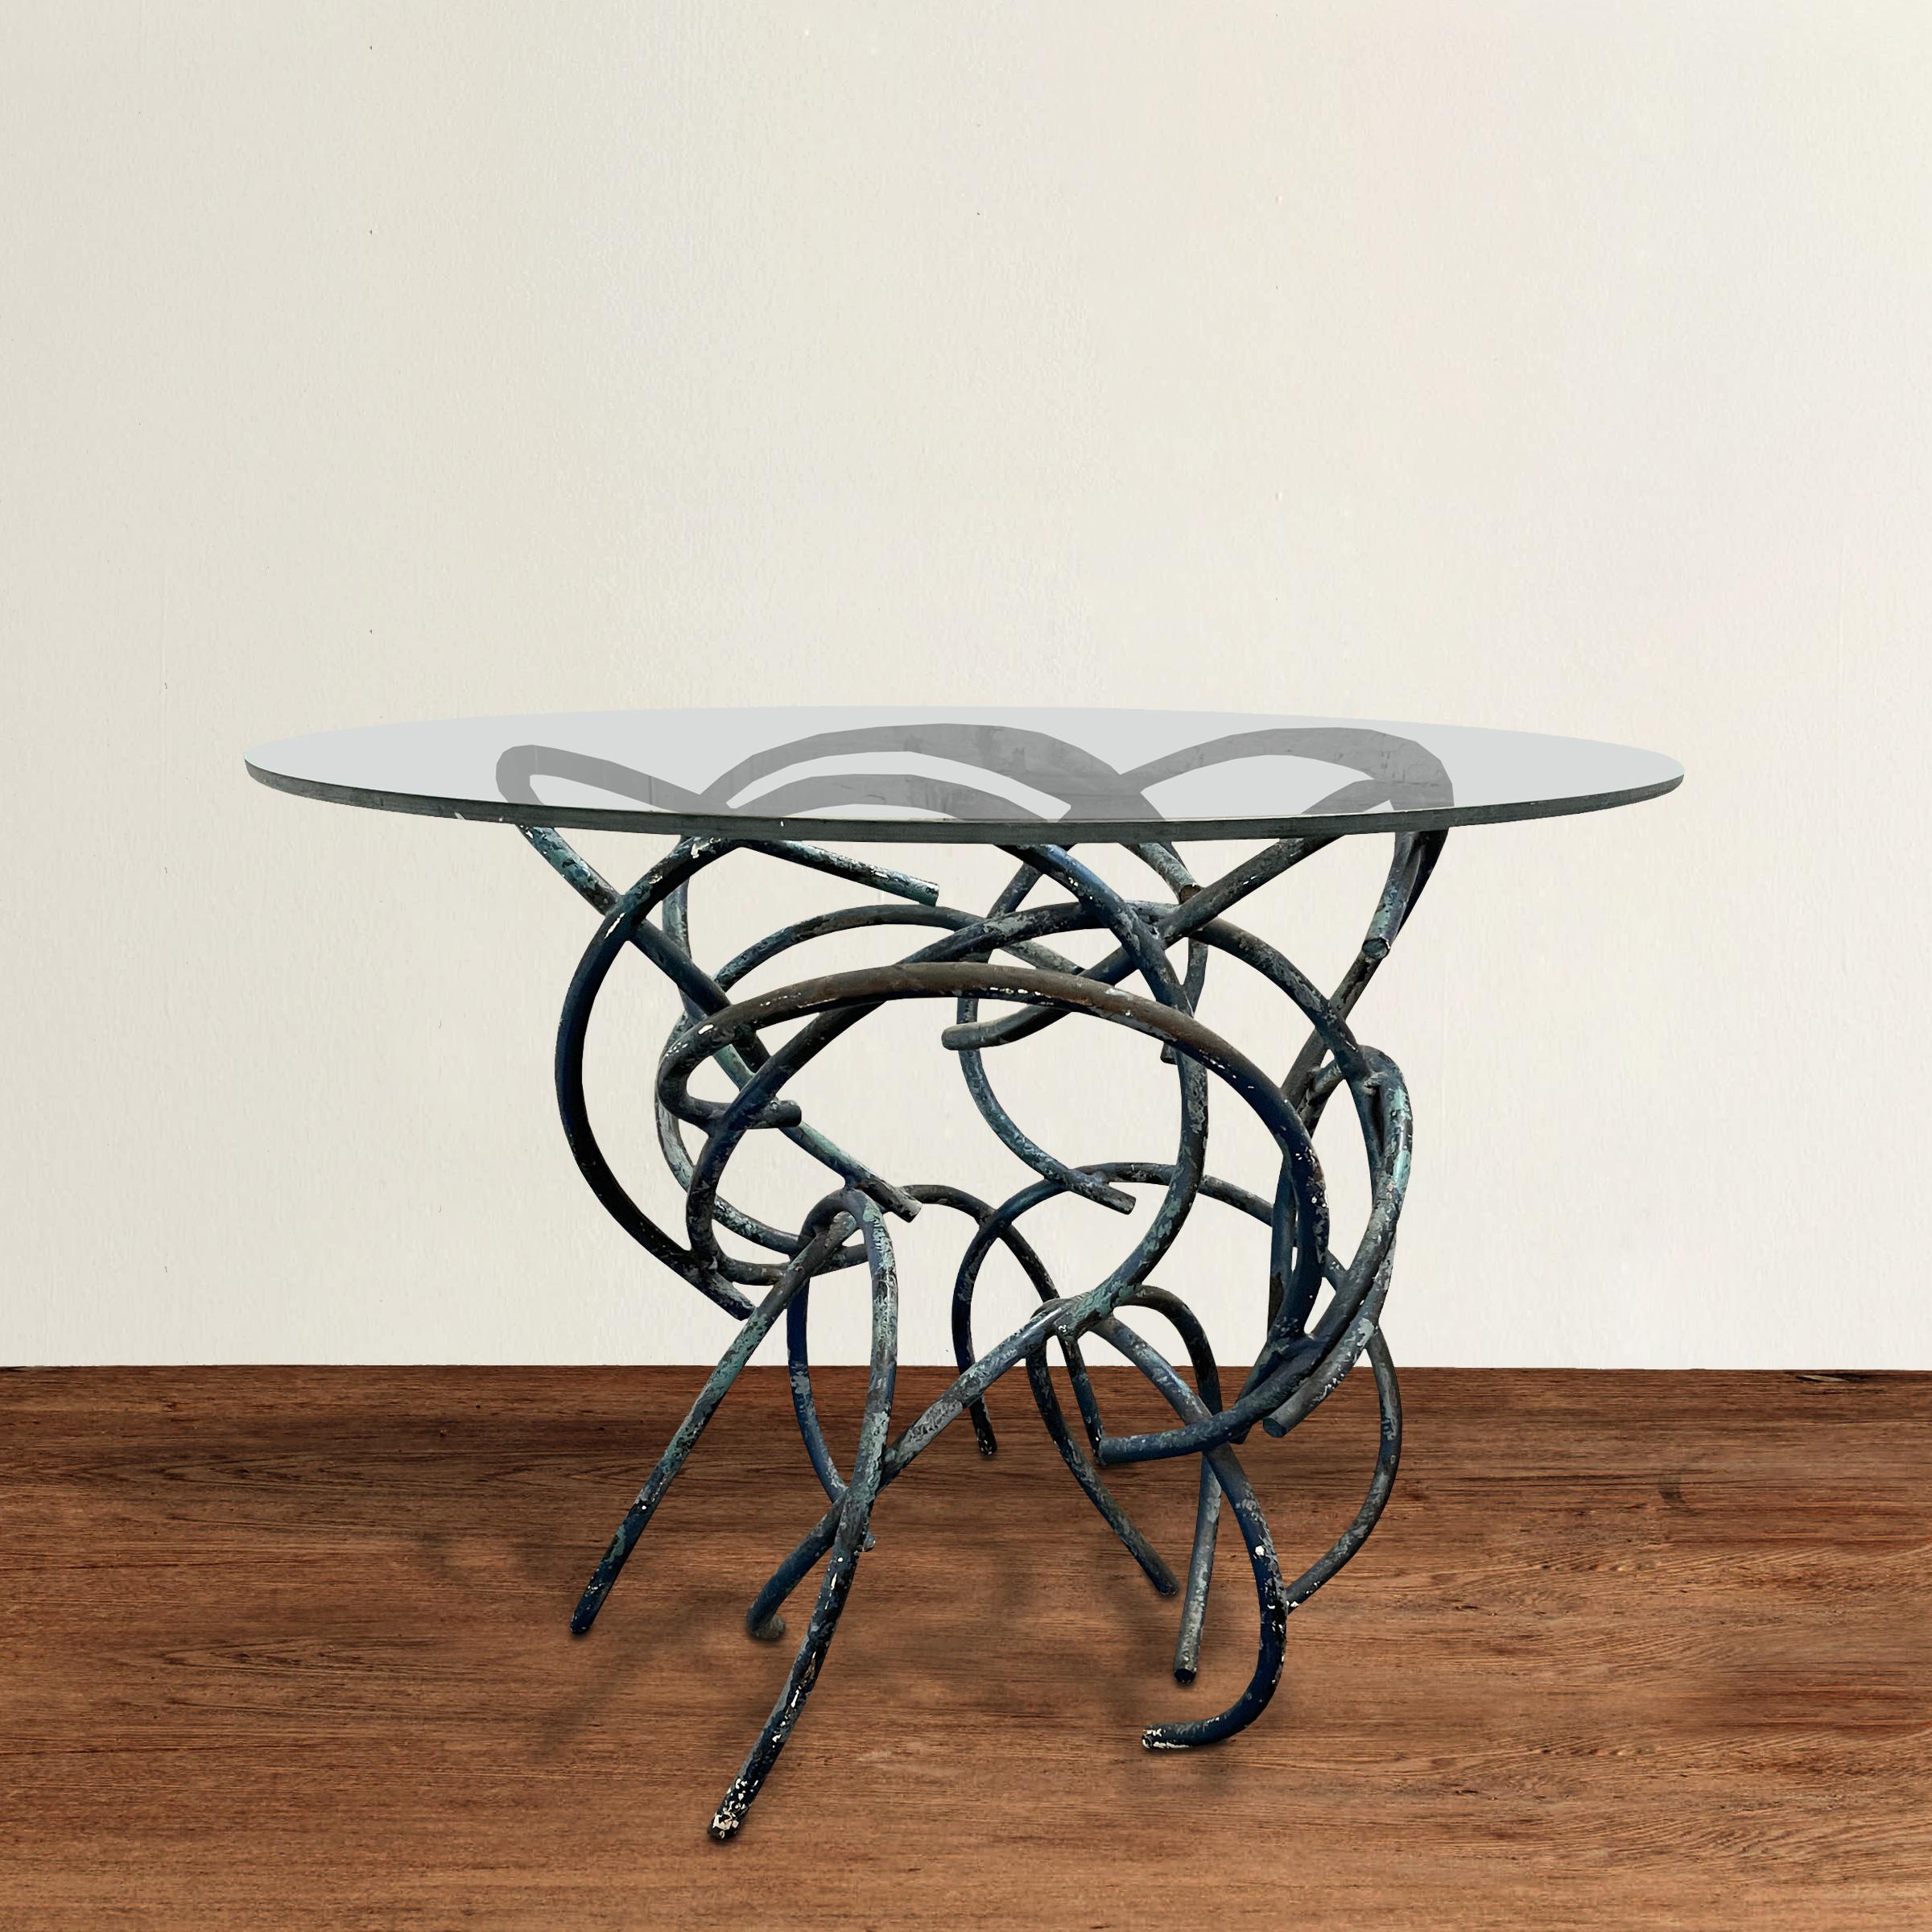 An incredible 20th century modern side table constructed from dozens of sculptural bent steel bars with a fantastic blue-gray painted finish, and with a glass top. Perfect next to your sofa, bed, or between two loungers by your pool!